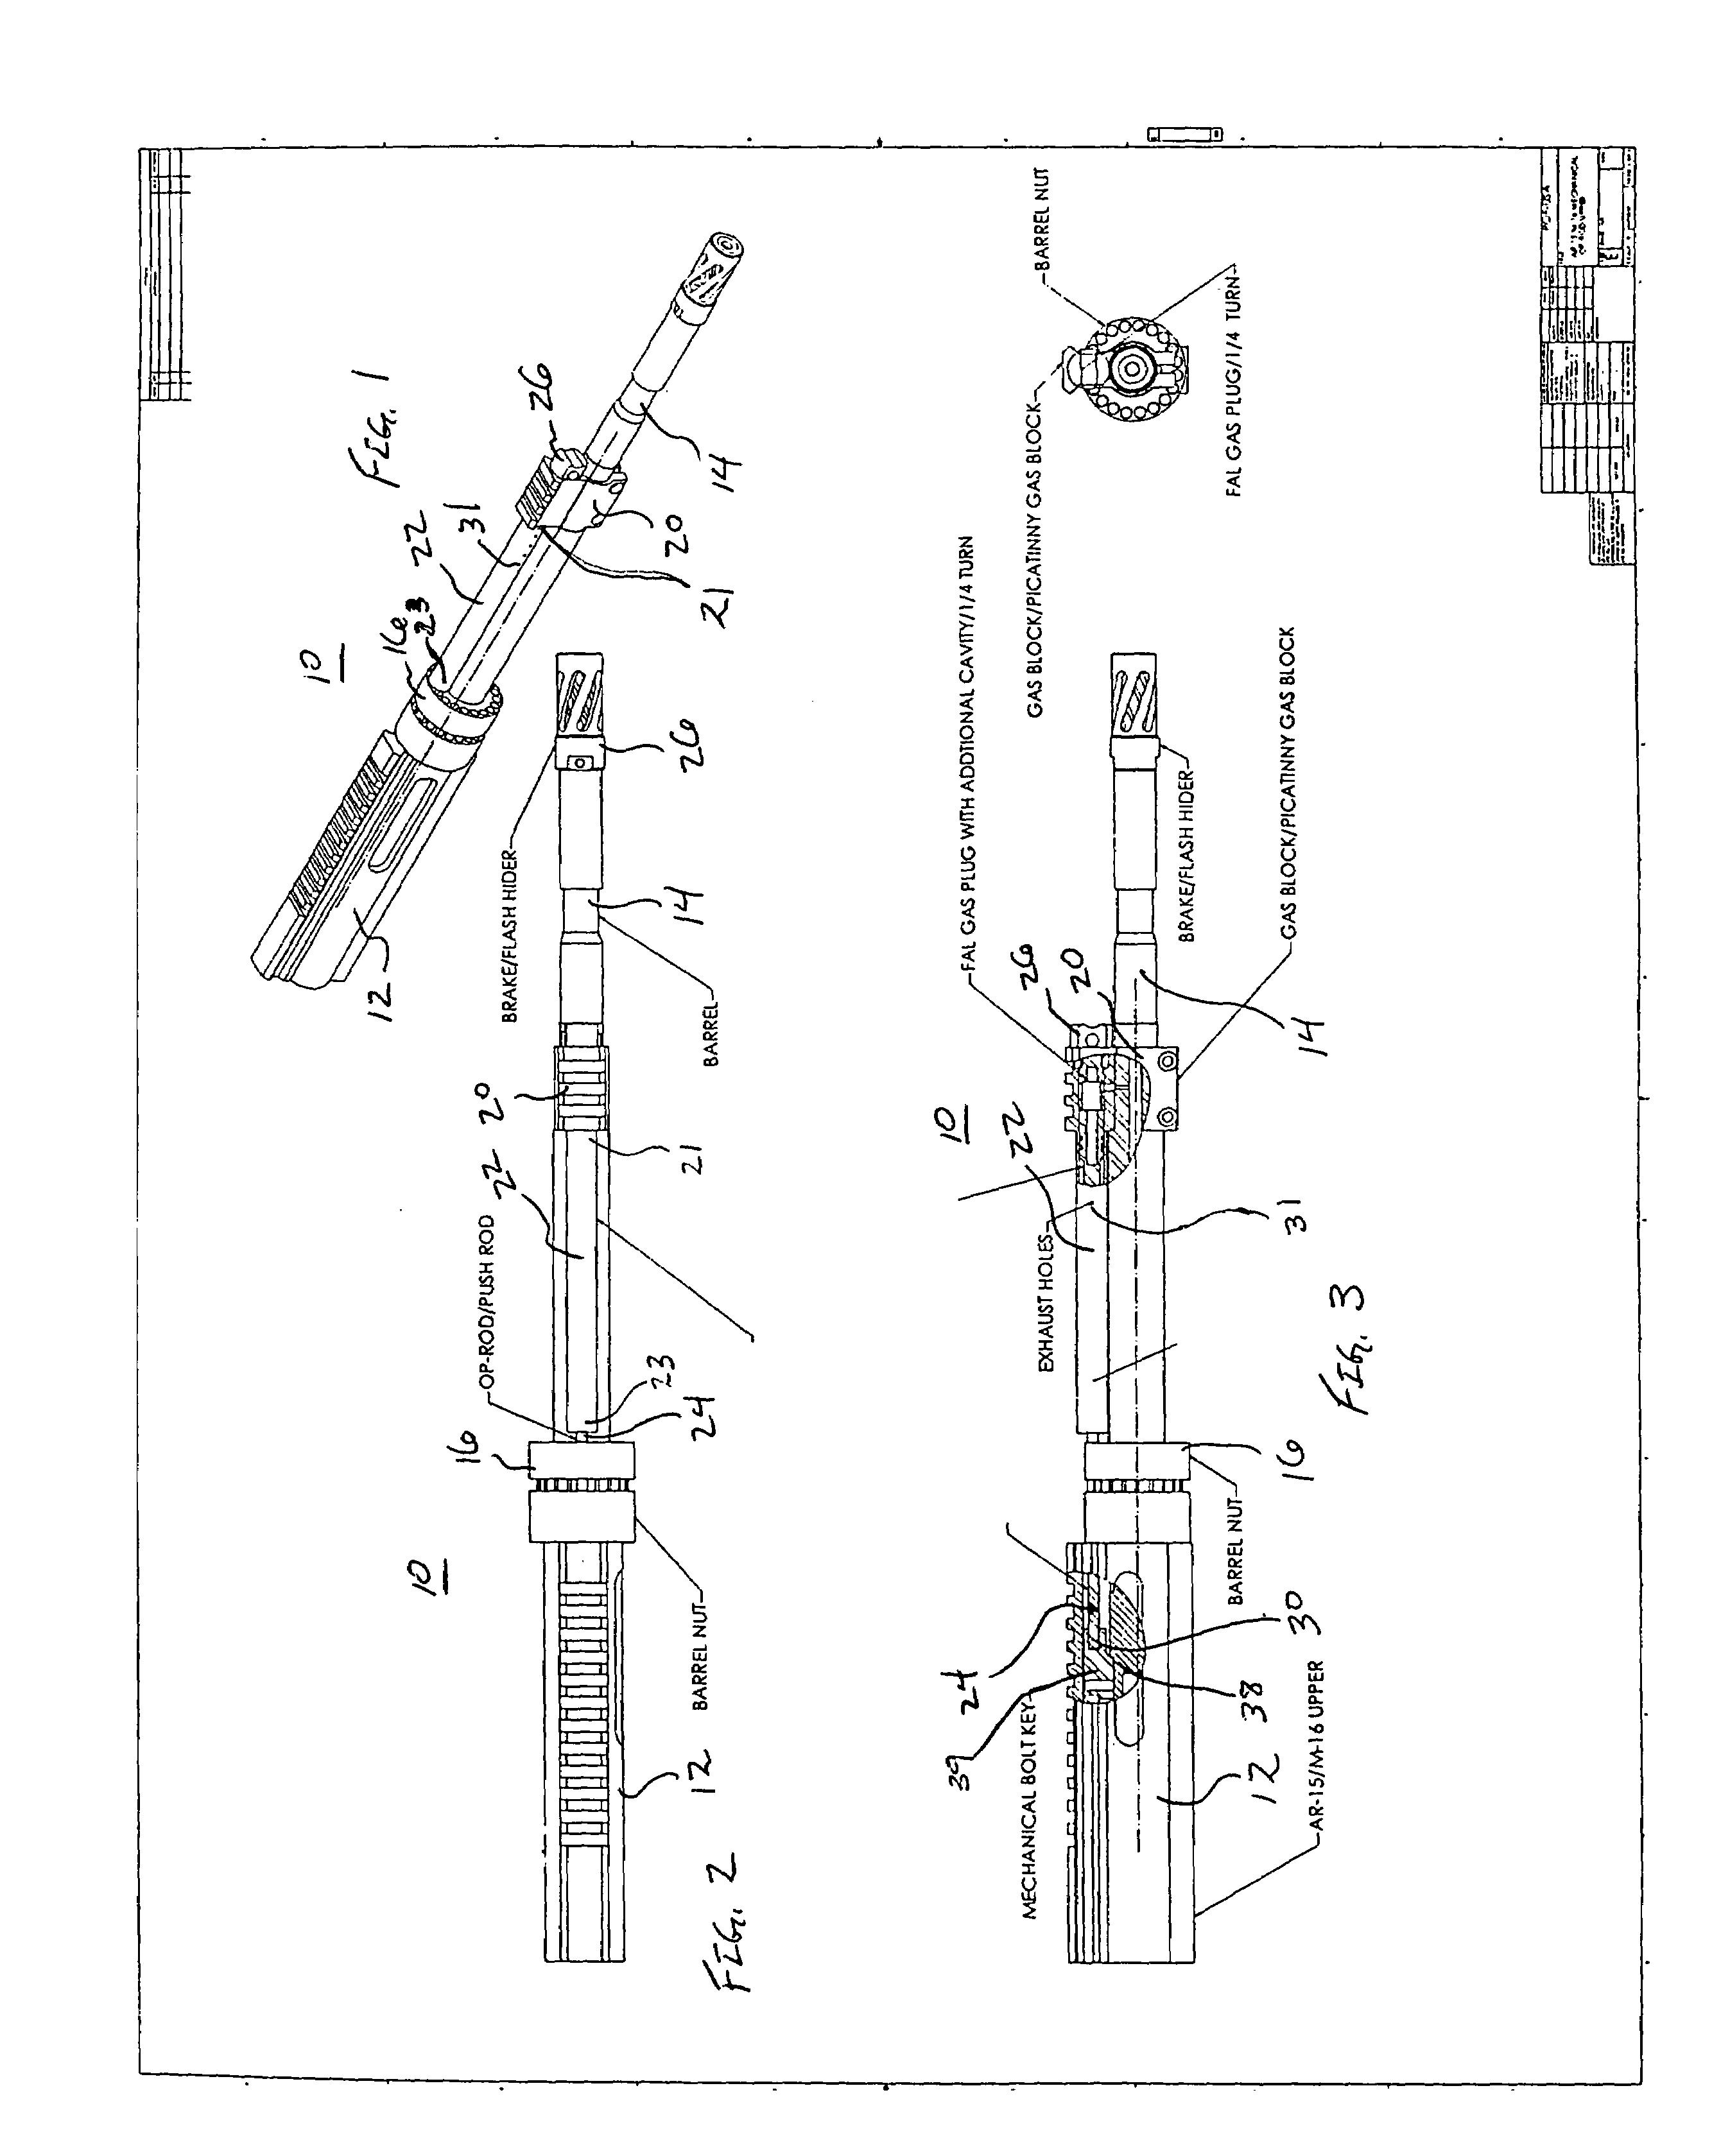 M16 modified with pushrod operating system and conversion method